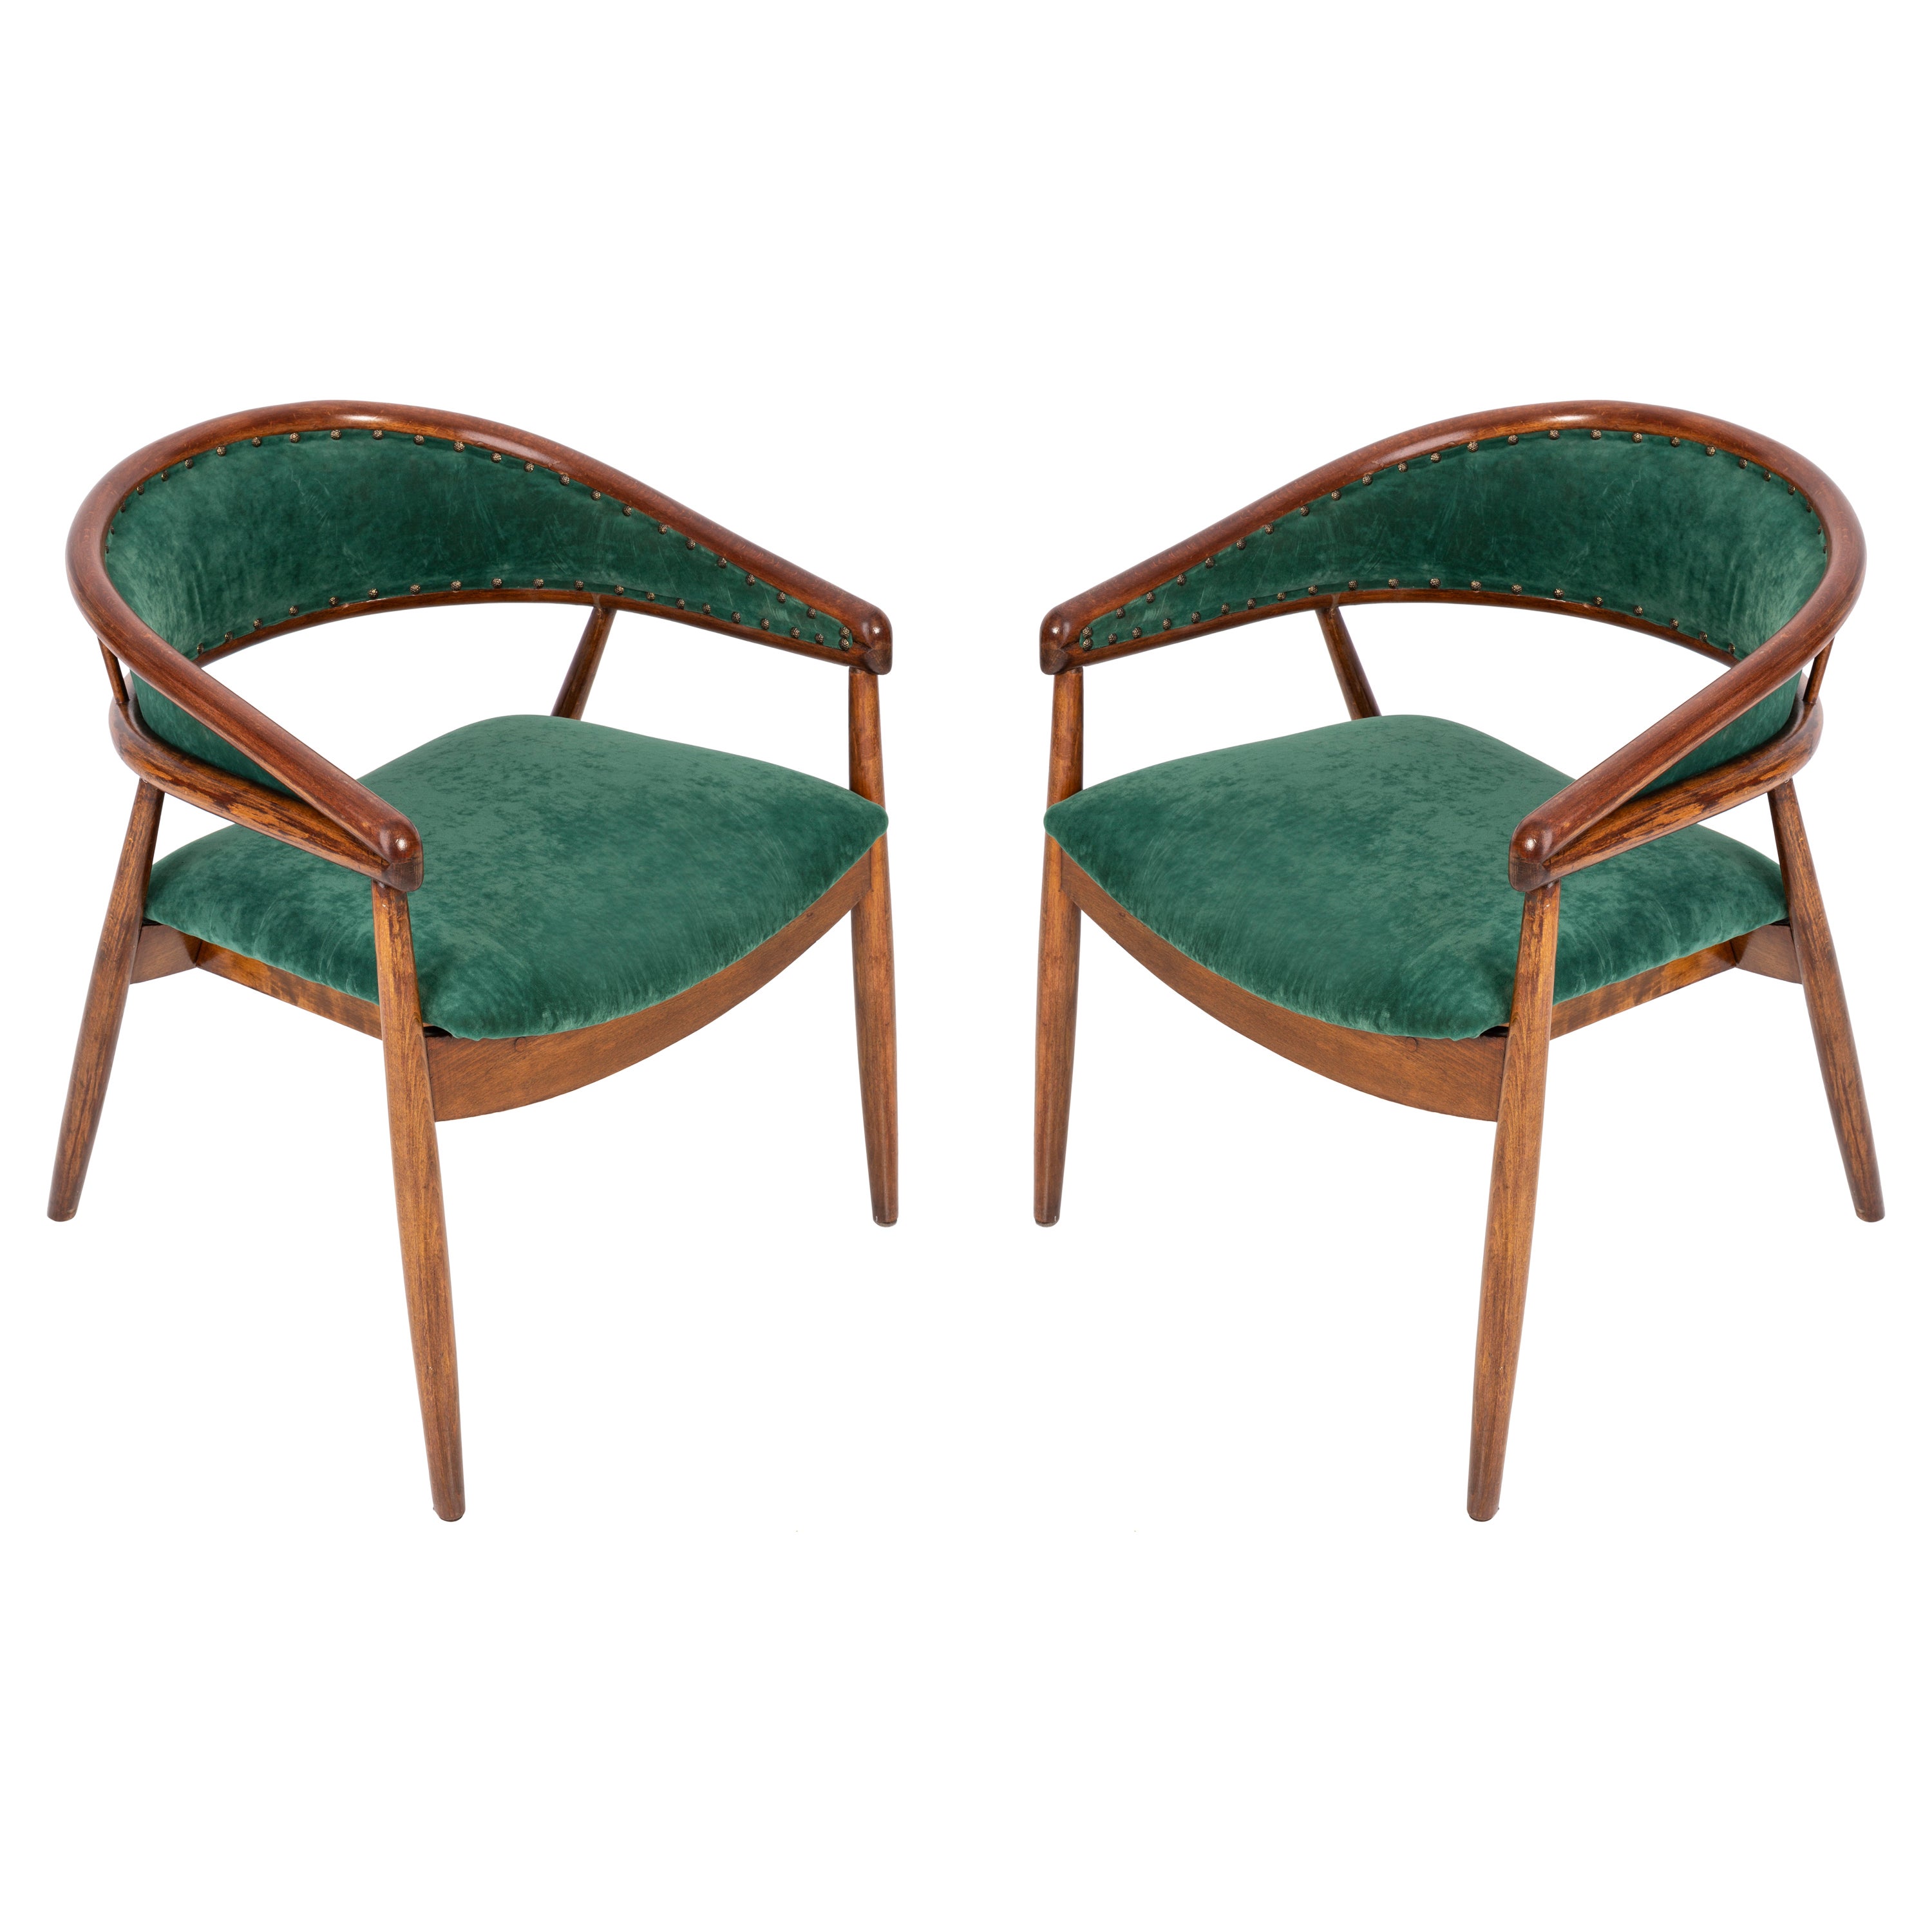 Set of Two Vintage James Mont Bent Beech Armchairs, Dark Green, Europe, 1960s For Sale